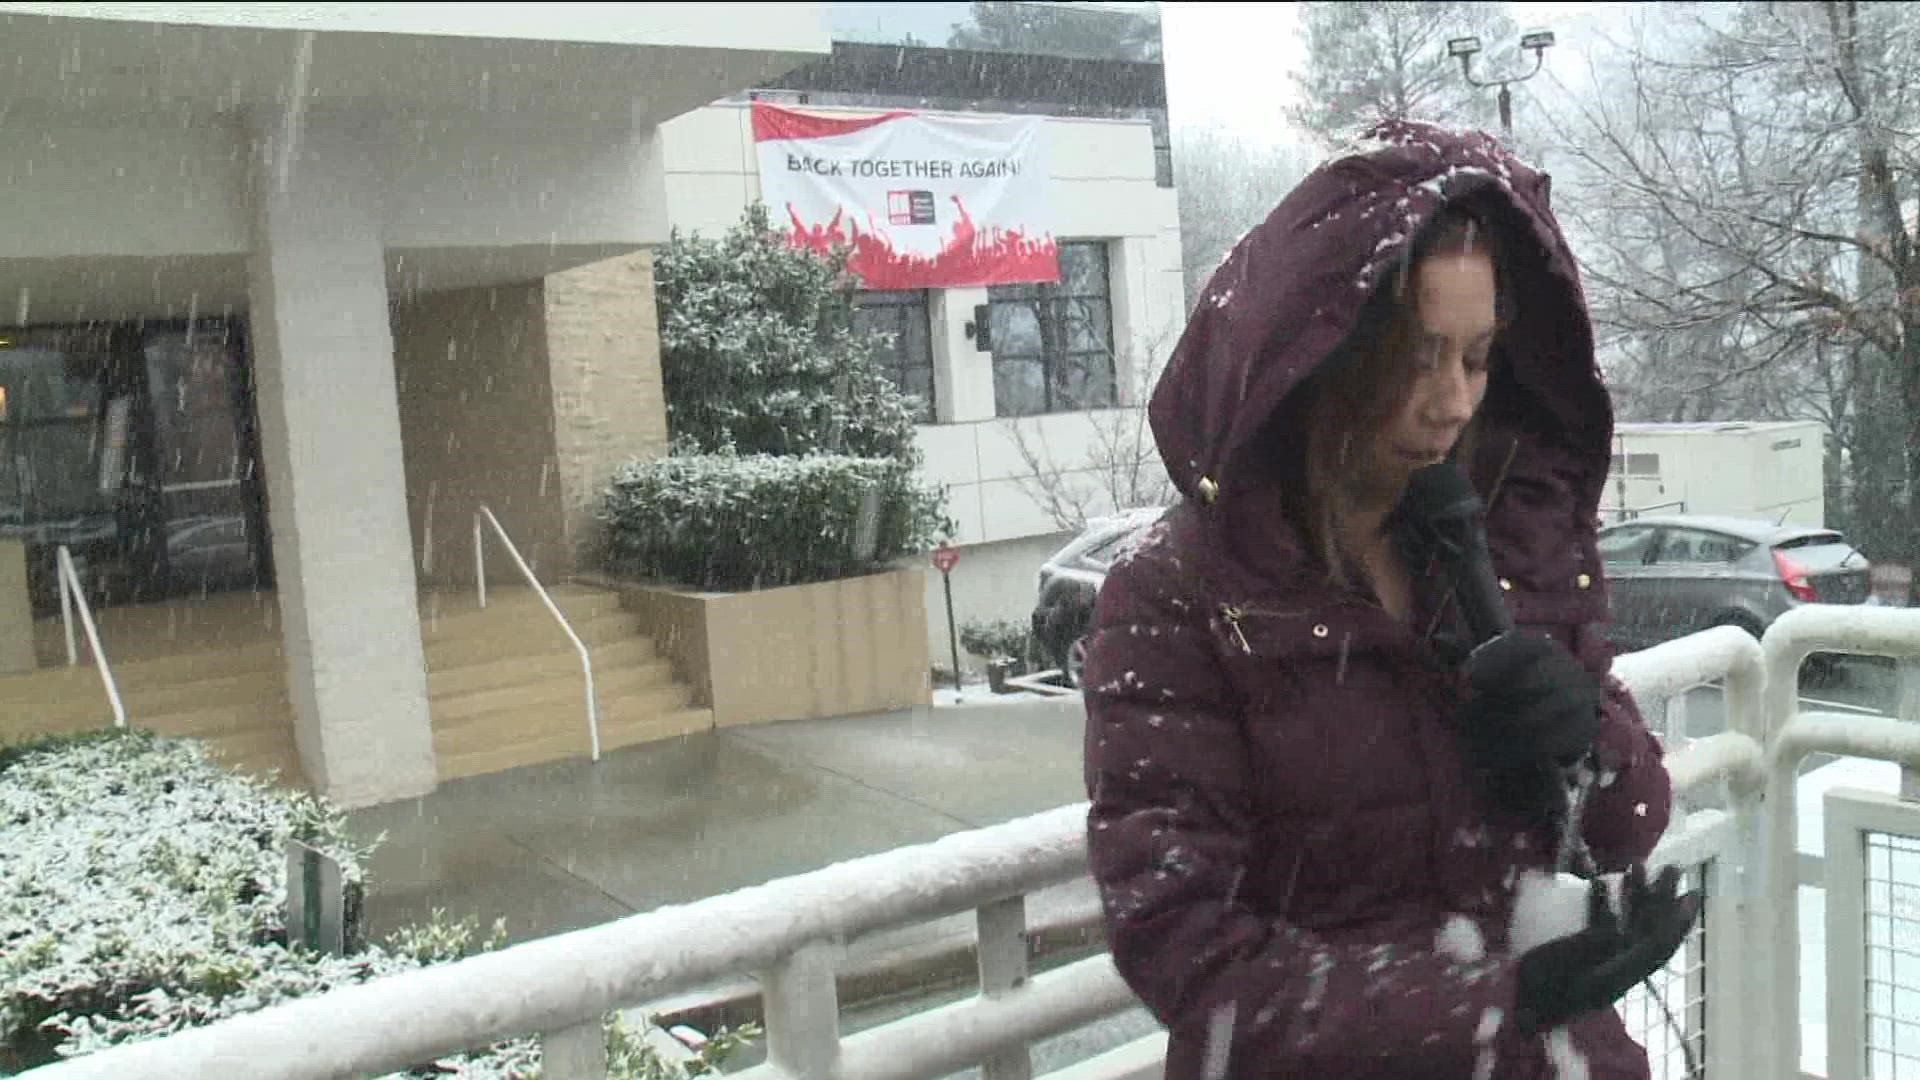 While doing her live shot, 11Alive meteorologist Melissa Nord got hit by a snowball by TrafficTracker Crash Clark.